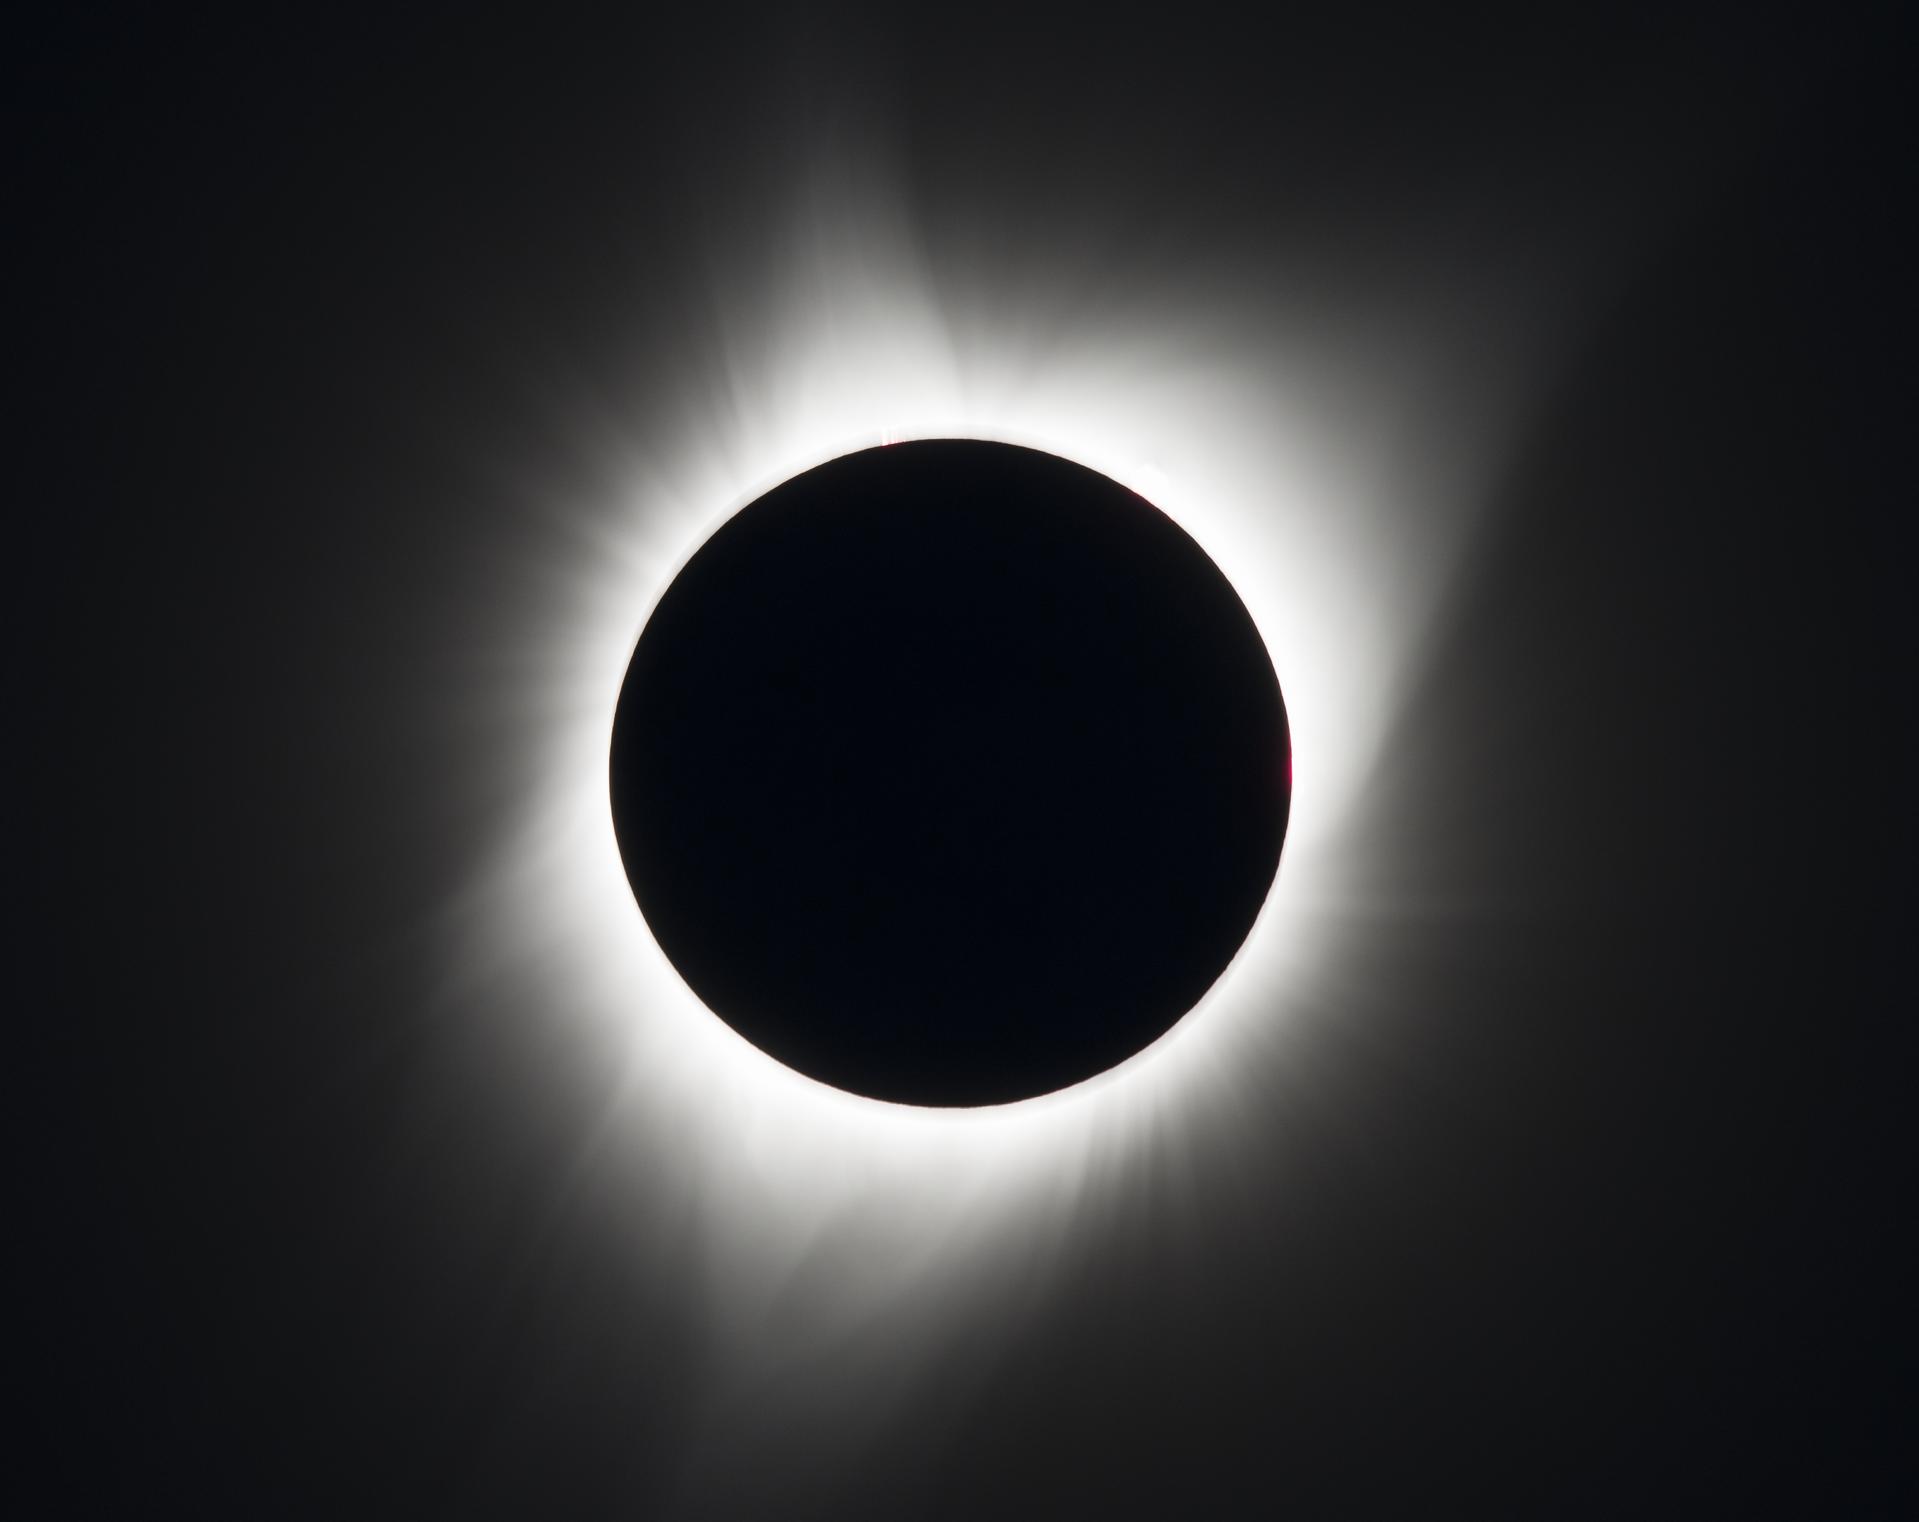 A total solar eclipse is seen on Monday, August 21, 2017 above Madras, Oregon. A total solar eclipse swept across a narrow portion of the contiguous United States from Lincoln Beach, Oregon to Charleston, South Carolina. A partial solar eclipse was visible across the entire North American continent along with parts of South America, Africa, and Europe. Photo Credit: (NASA/Aubrey Gemignani)